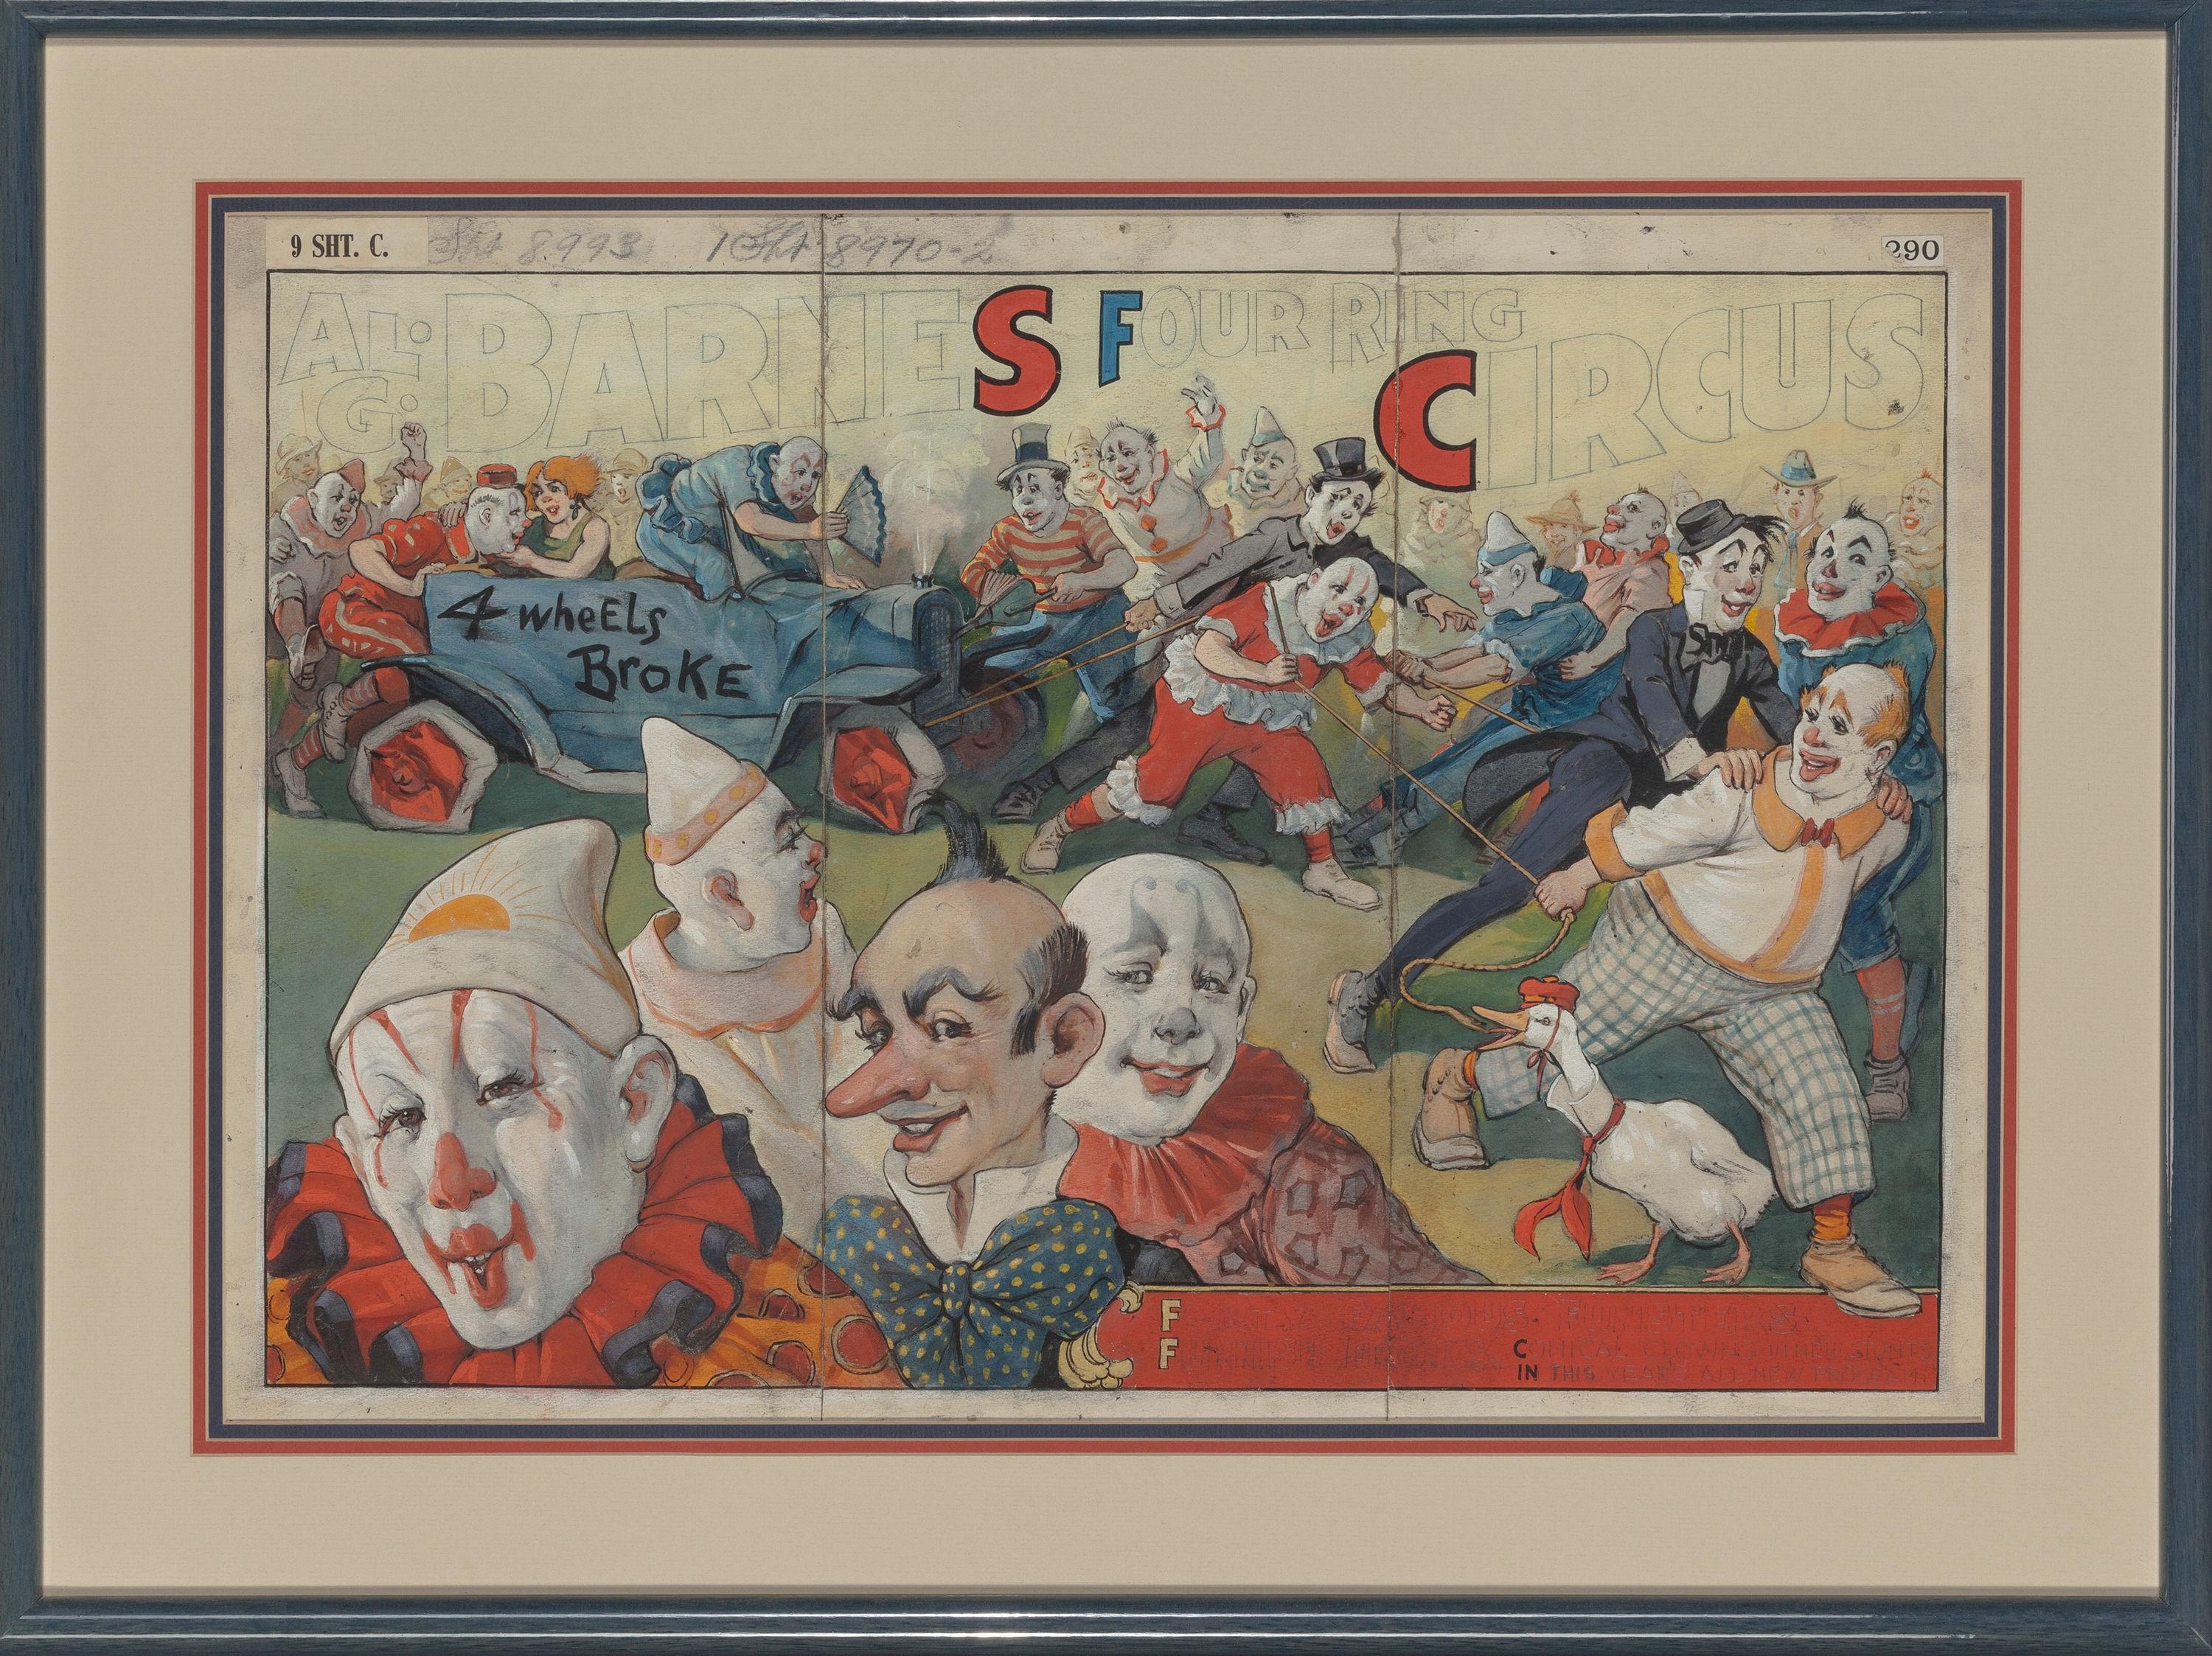 Al G. Barnes Four Ring Circus - Painting by Unknown